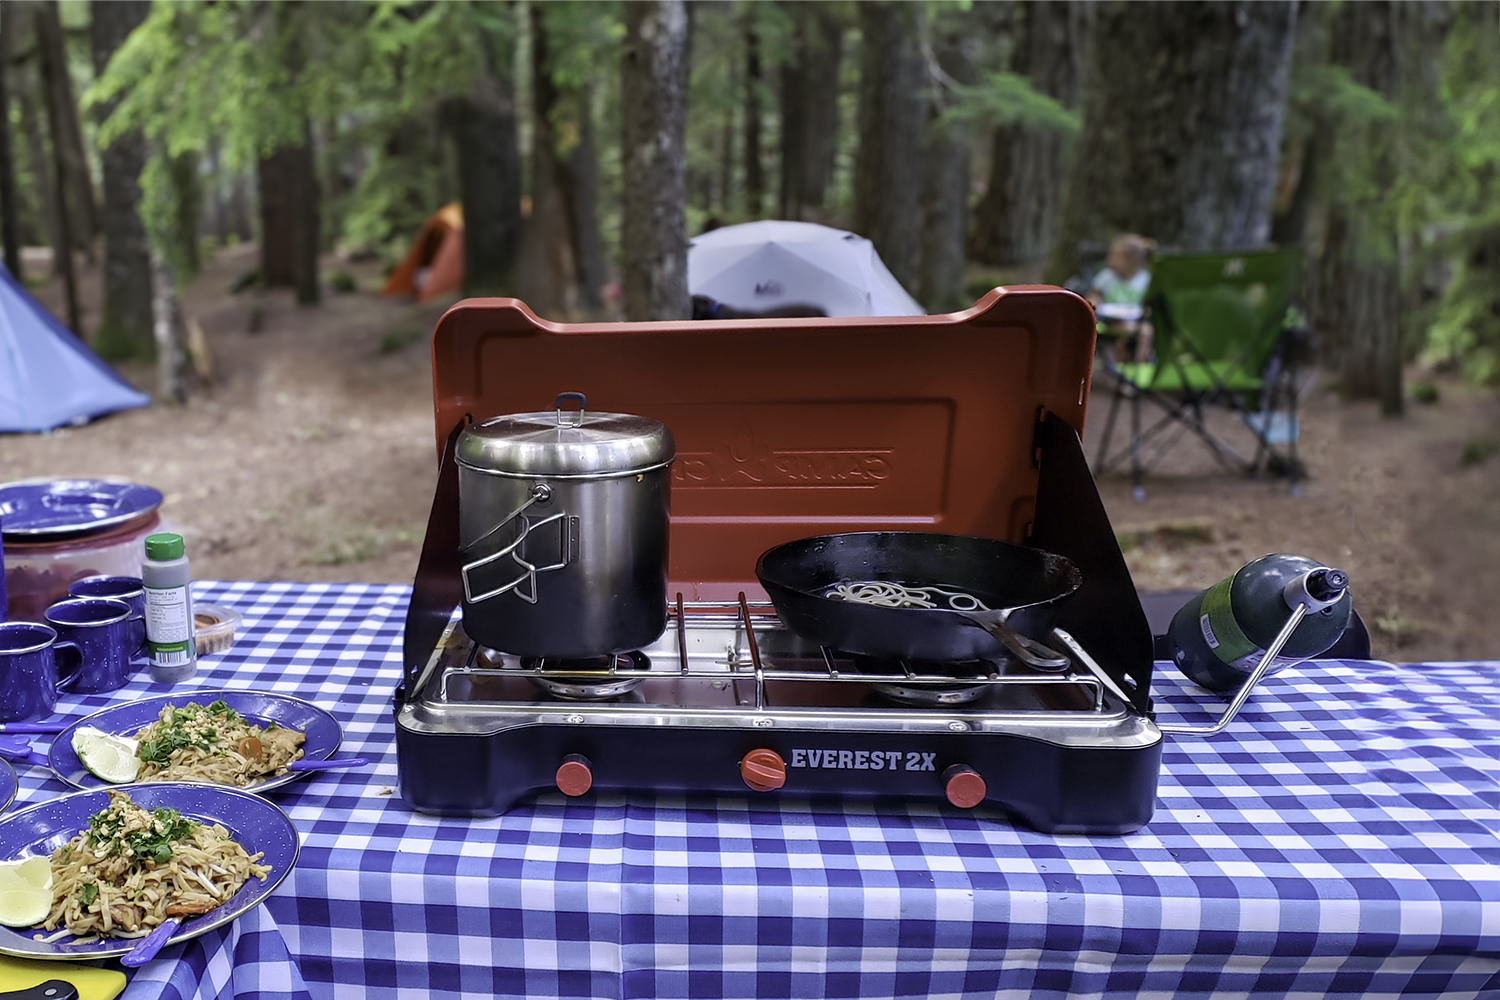 The Camp Chef Everest 2x camping stove and plates of pad Thai on a table with a blue checkered tablecloth with a forested camping scene in the background